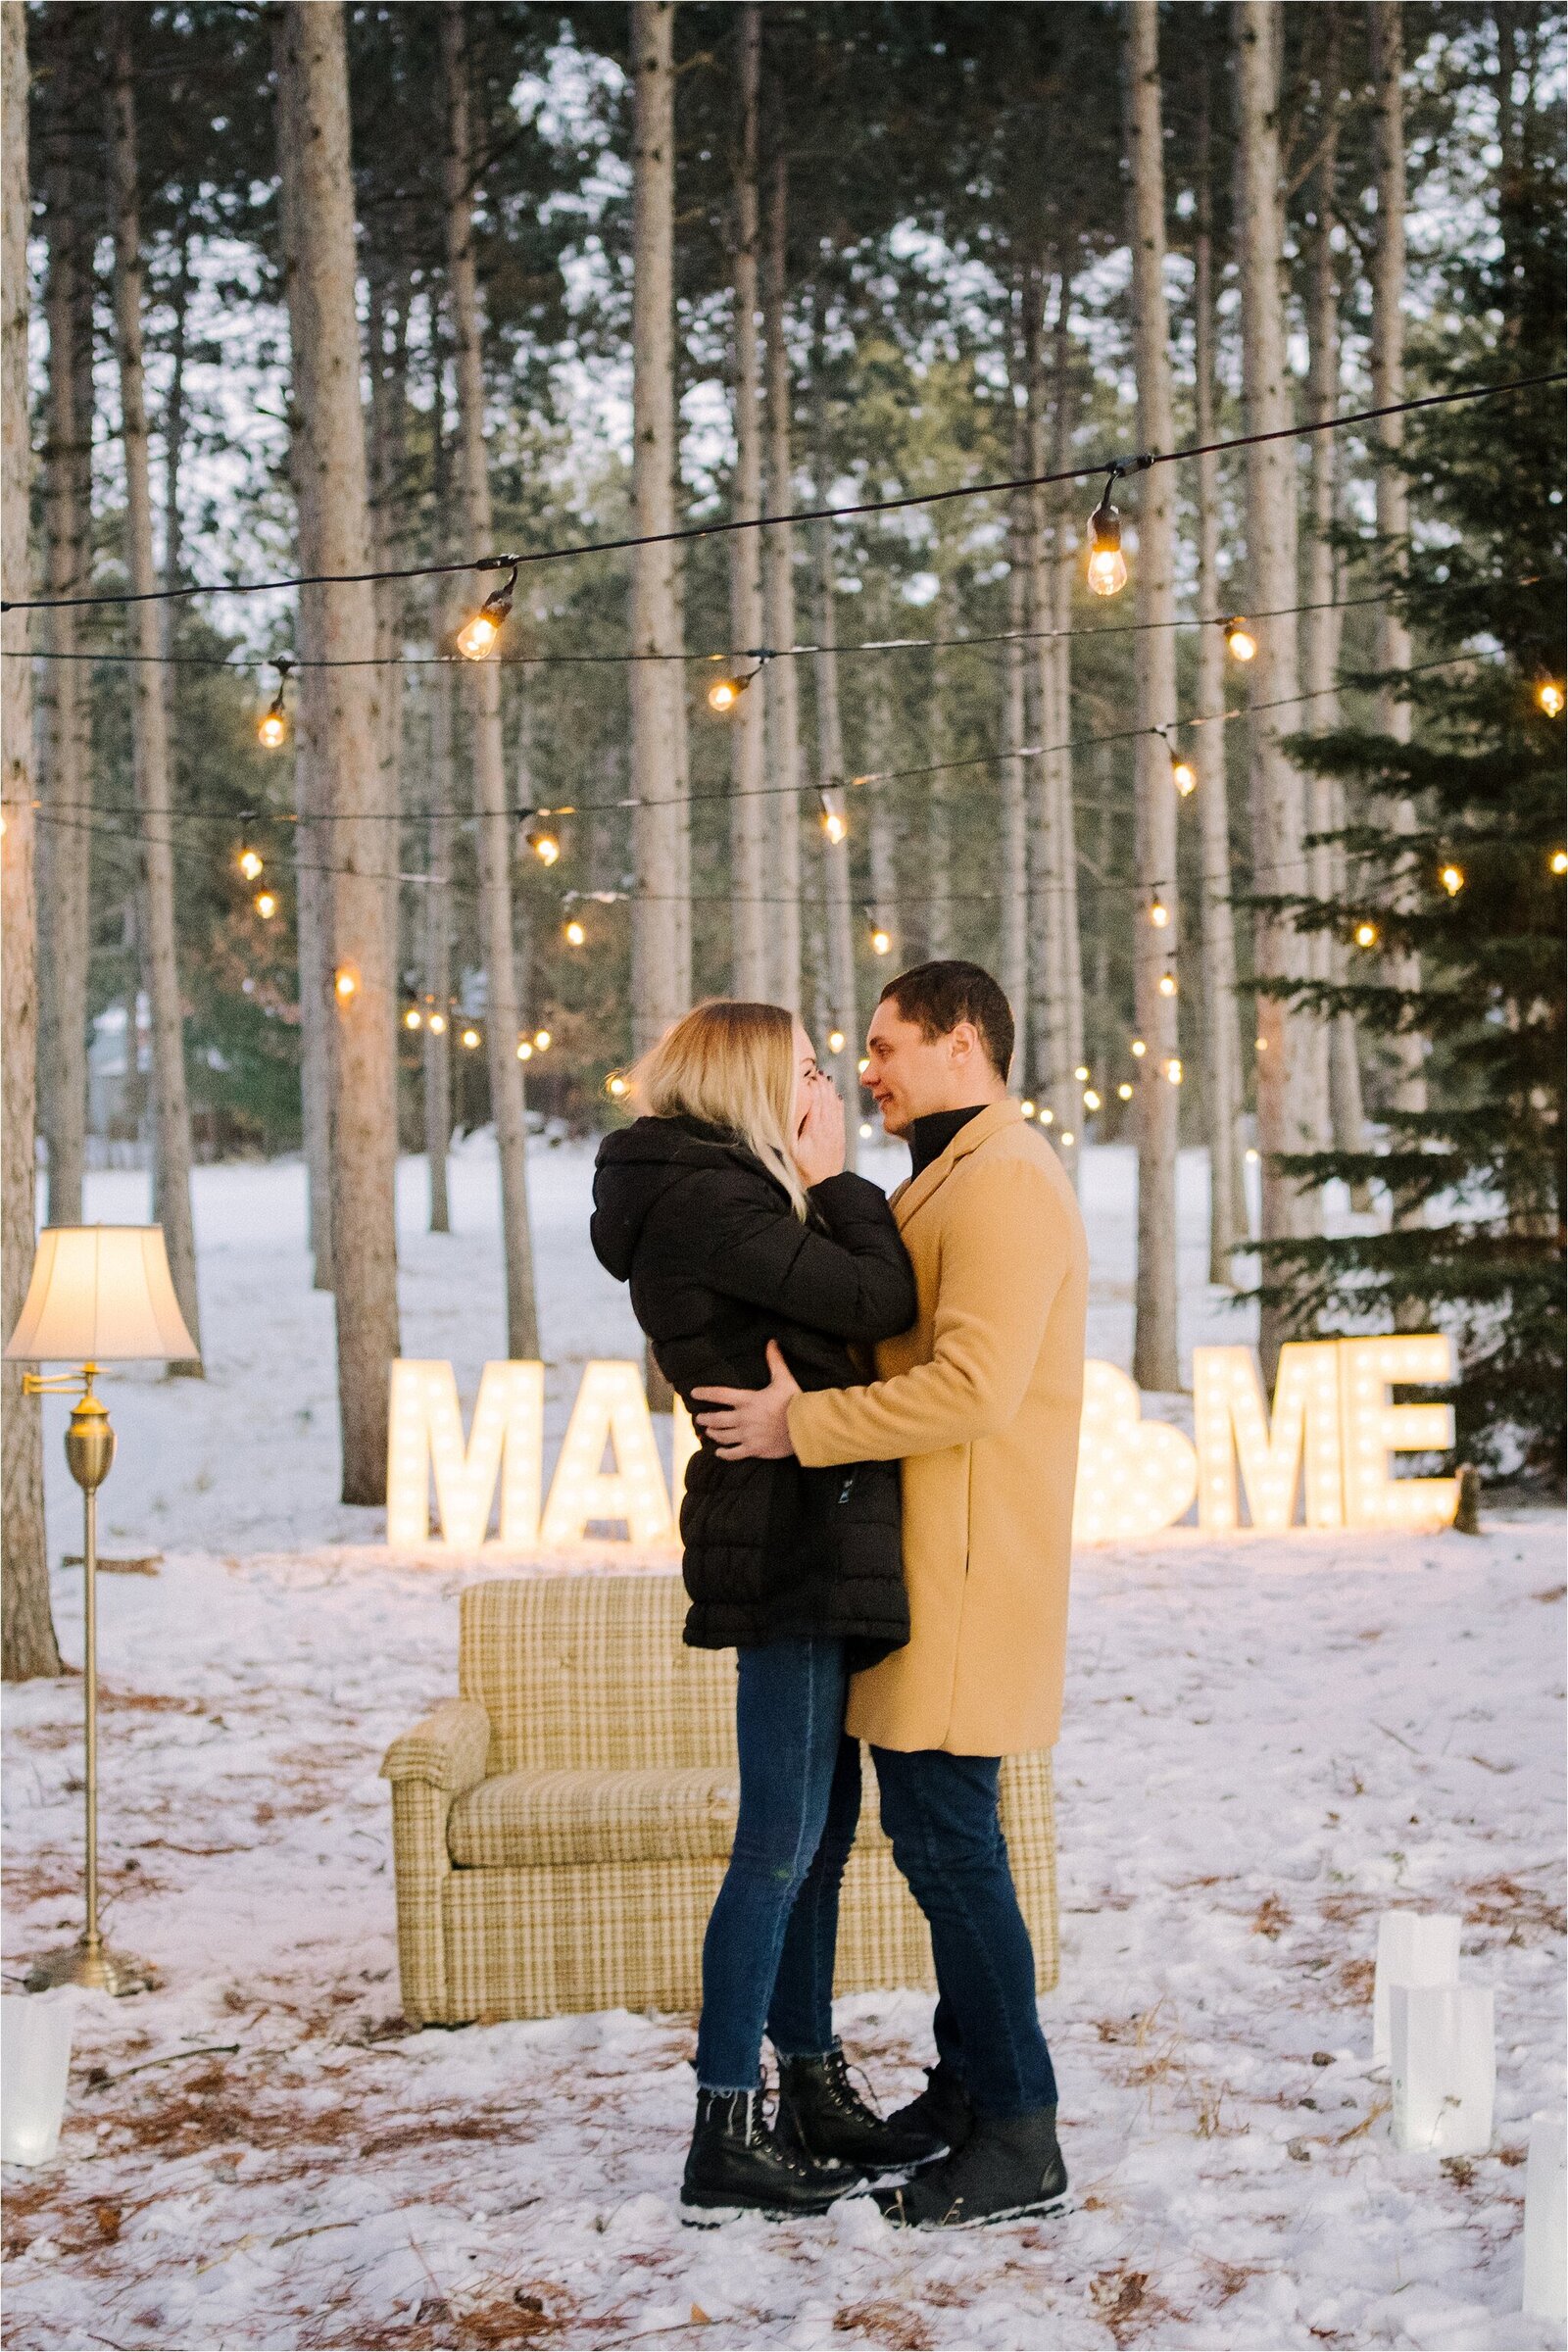 Magical-Woods-Proposal-16